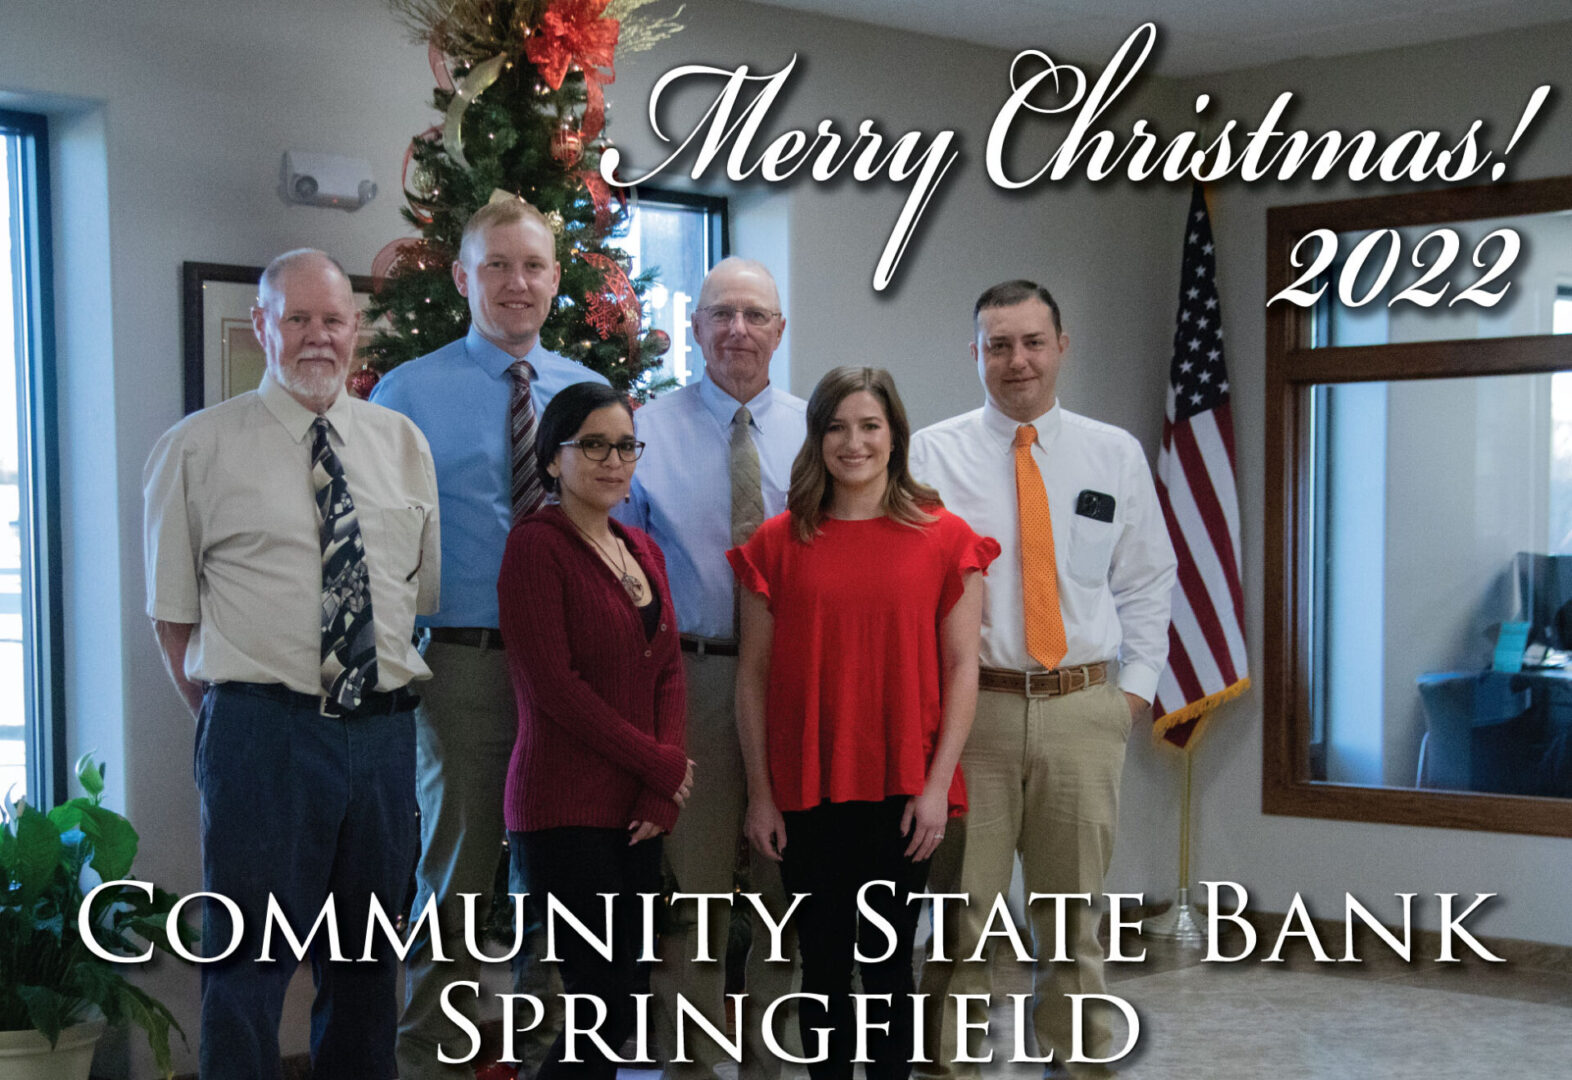 ABOUT SPRINGFIELD – Community State Bank